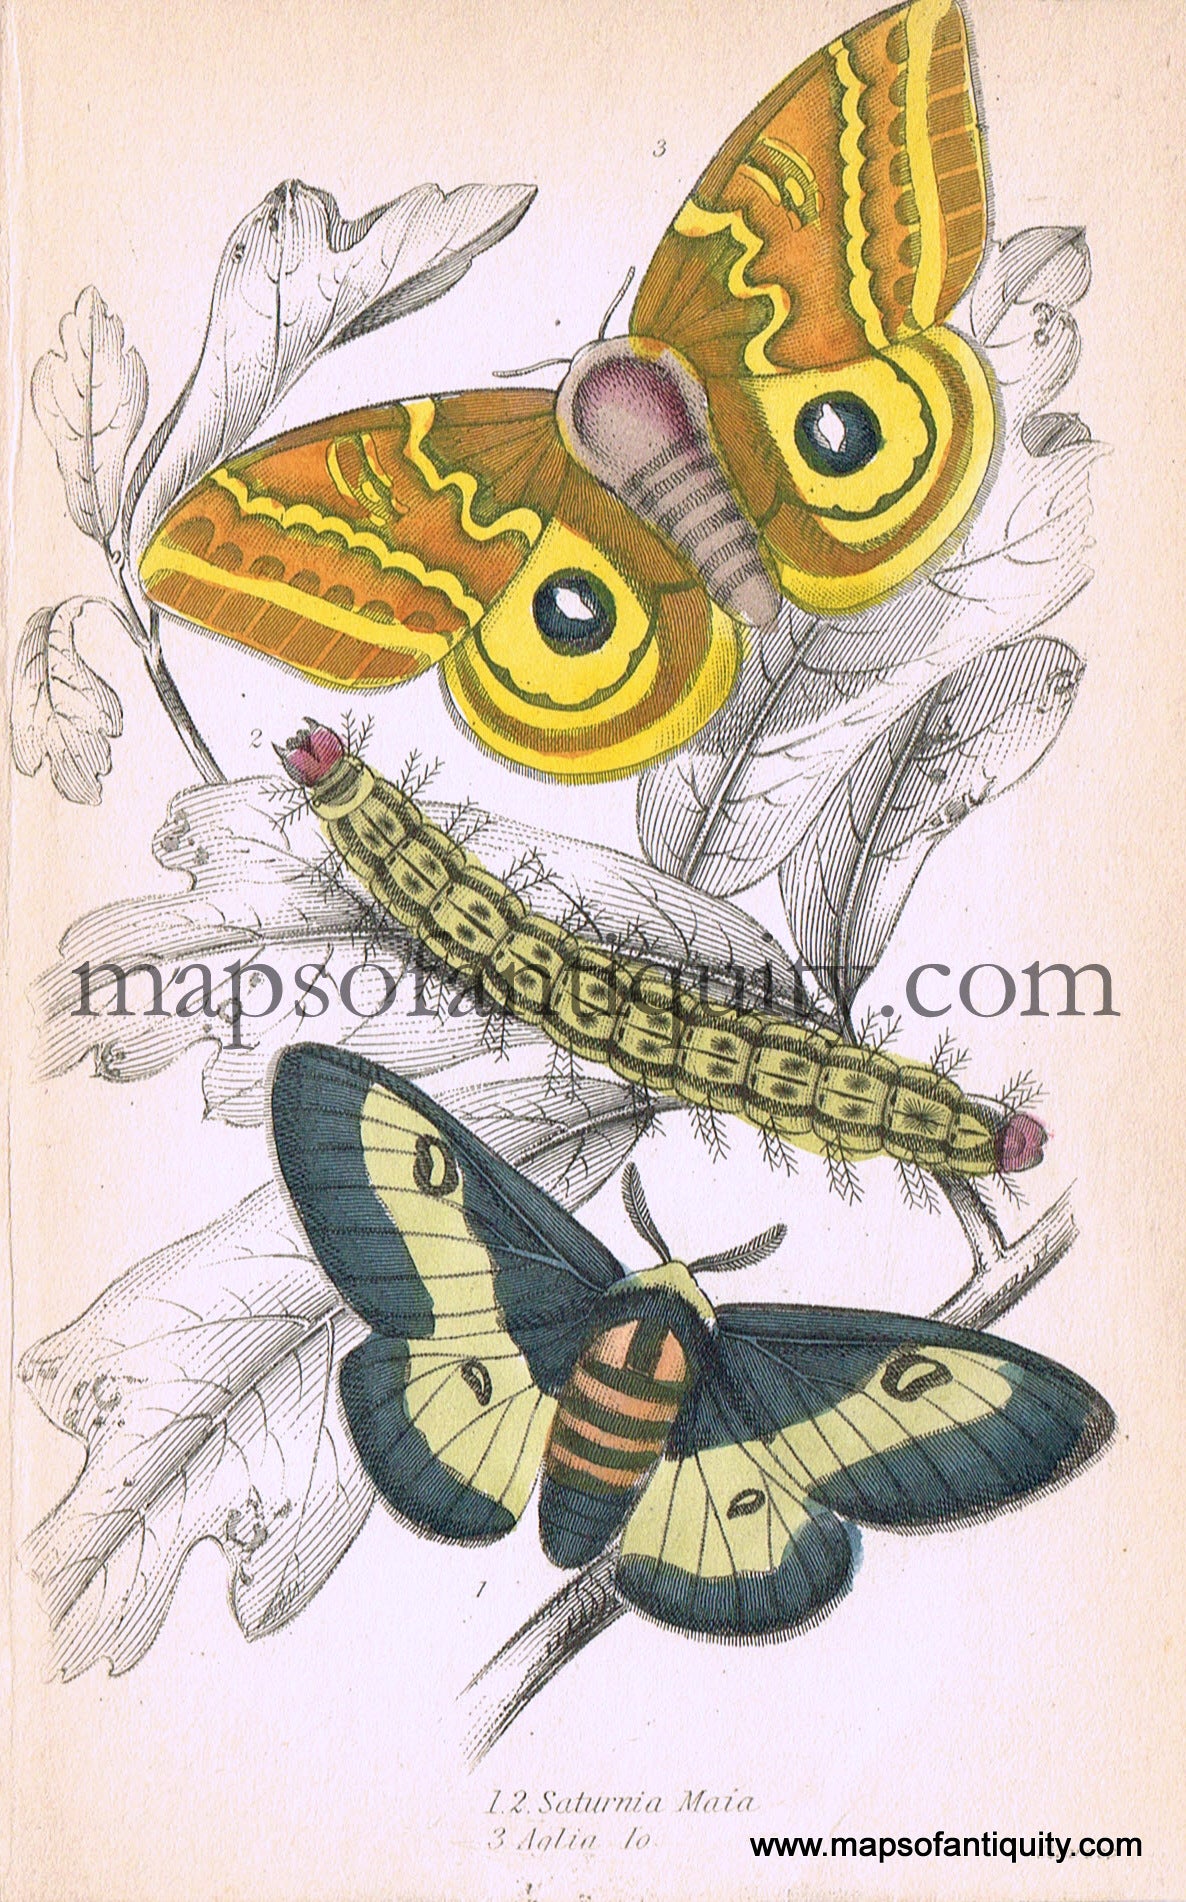 Antique-Hand-Colored-Print-Saturnia-maia-&-Aglia-Io.-Antique-Prints-Natural-History-Insects-1840-Duncan-Maps-Of-Antiquity